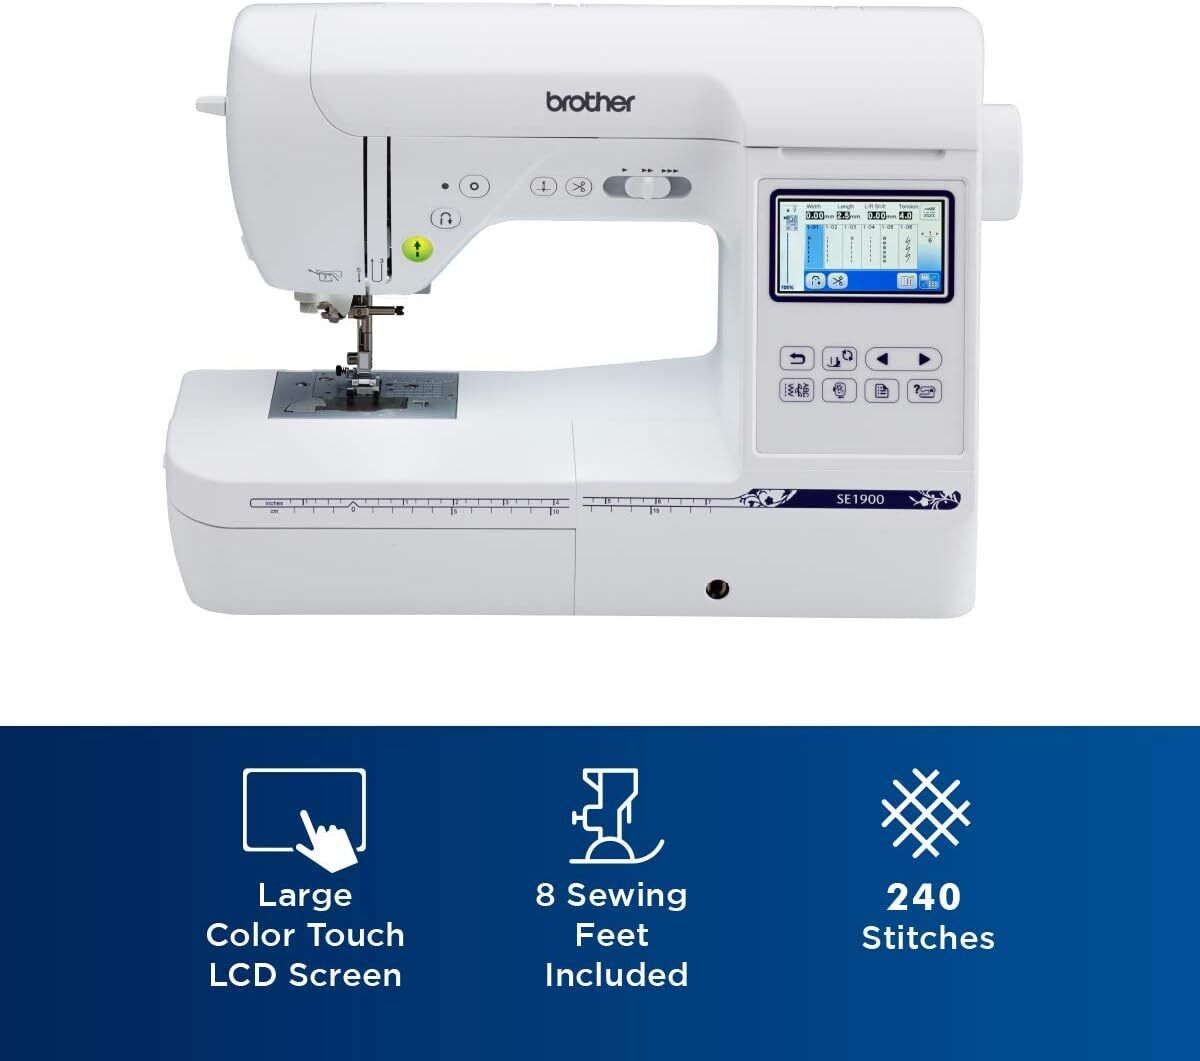 Brother SE1900 Sewing and Embroidery Machine - White for sale online